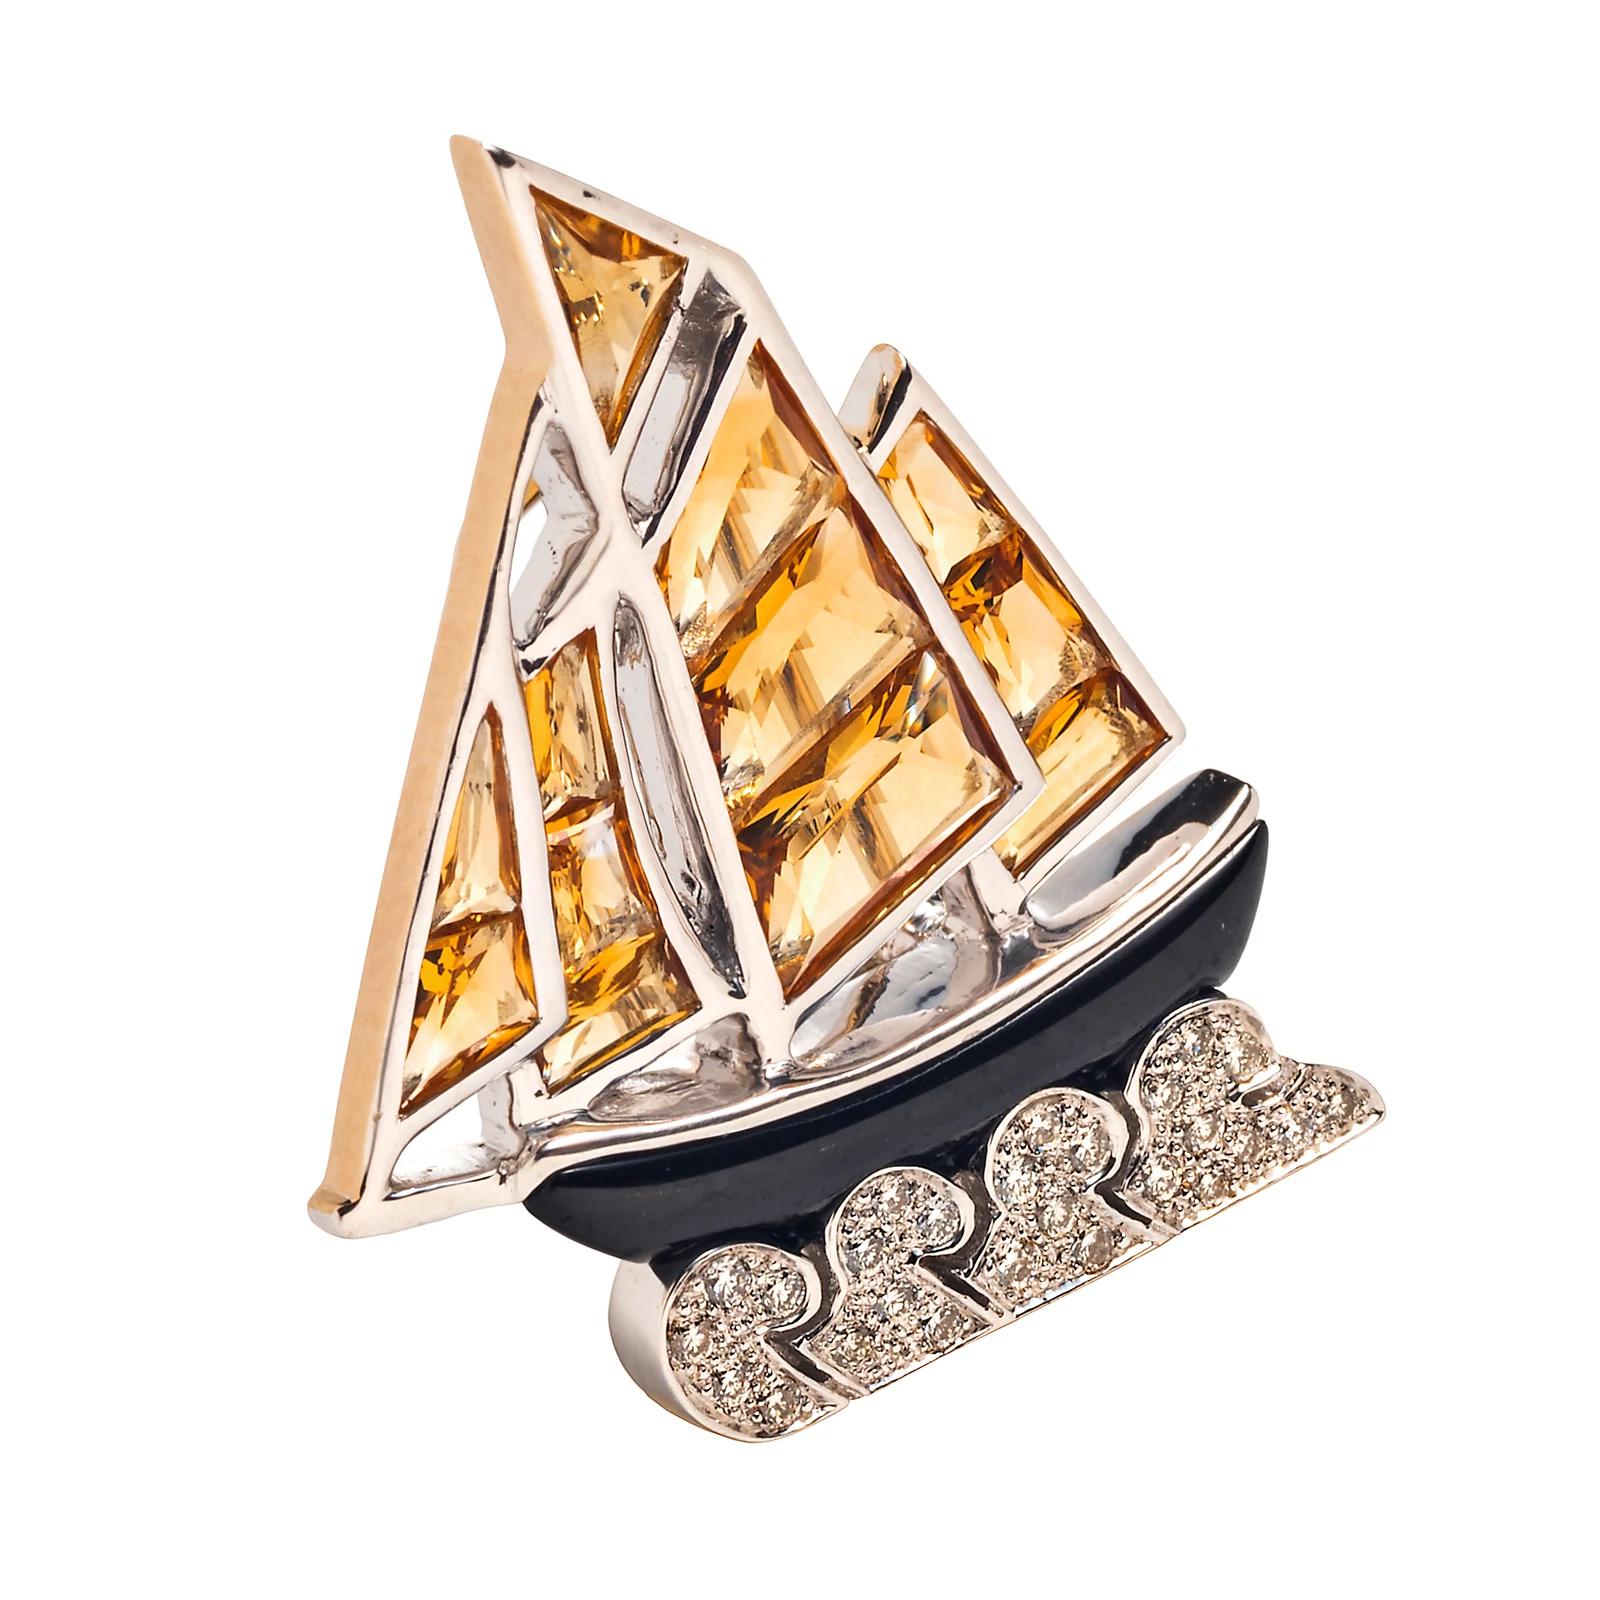 It is said that a brooch is the purest expression of the jeweler’s art. In this buoyant Cartier piece the careful cutting of the citrines captures the essence of a boat under full sail. The onyx hull glides along swelling waves composed of 26 round